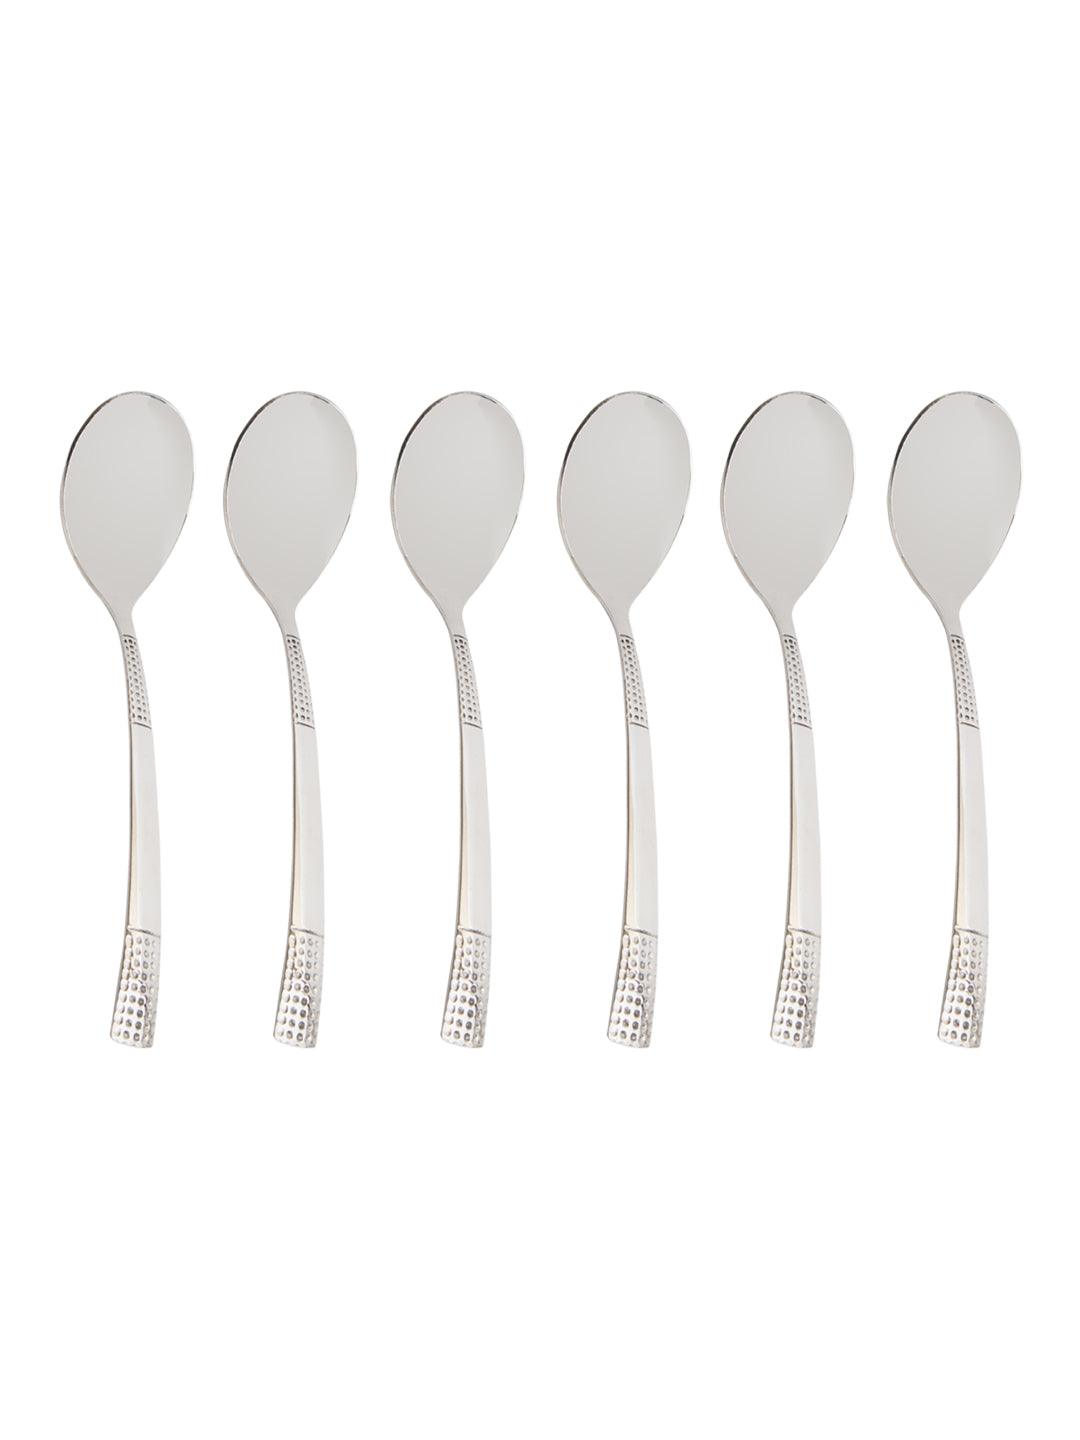 Pinti Dot Steel Tableware Cutlery Set Of 18 Pcs With Stand in Silver Colour - MARKET 99